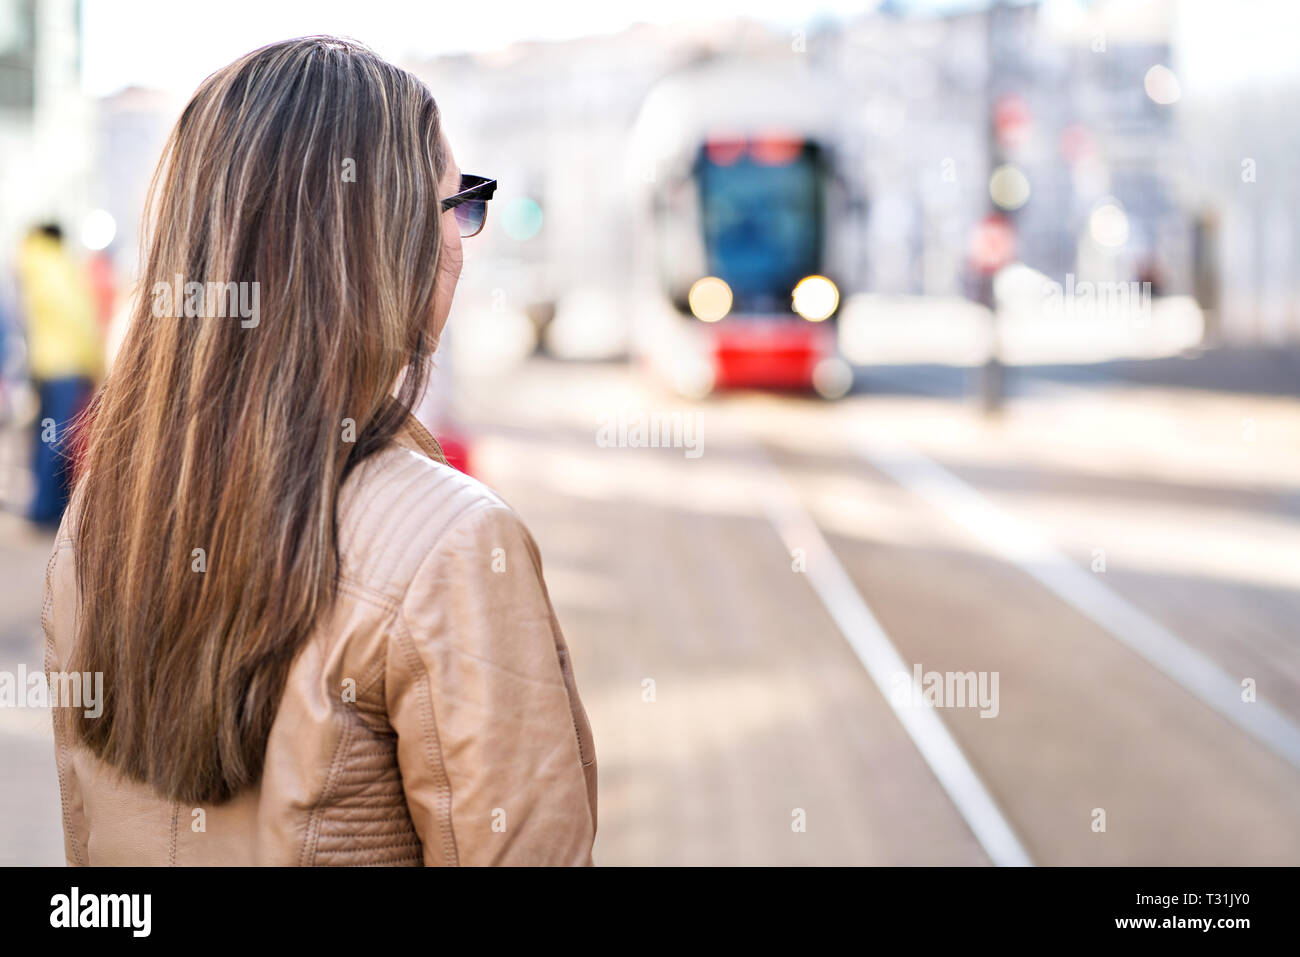 Back view of woman waiting for tram in stop. Passenger looking at arriving city train at station. Commuter or student or using public transportation. Stock Photo